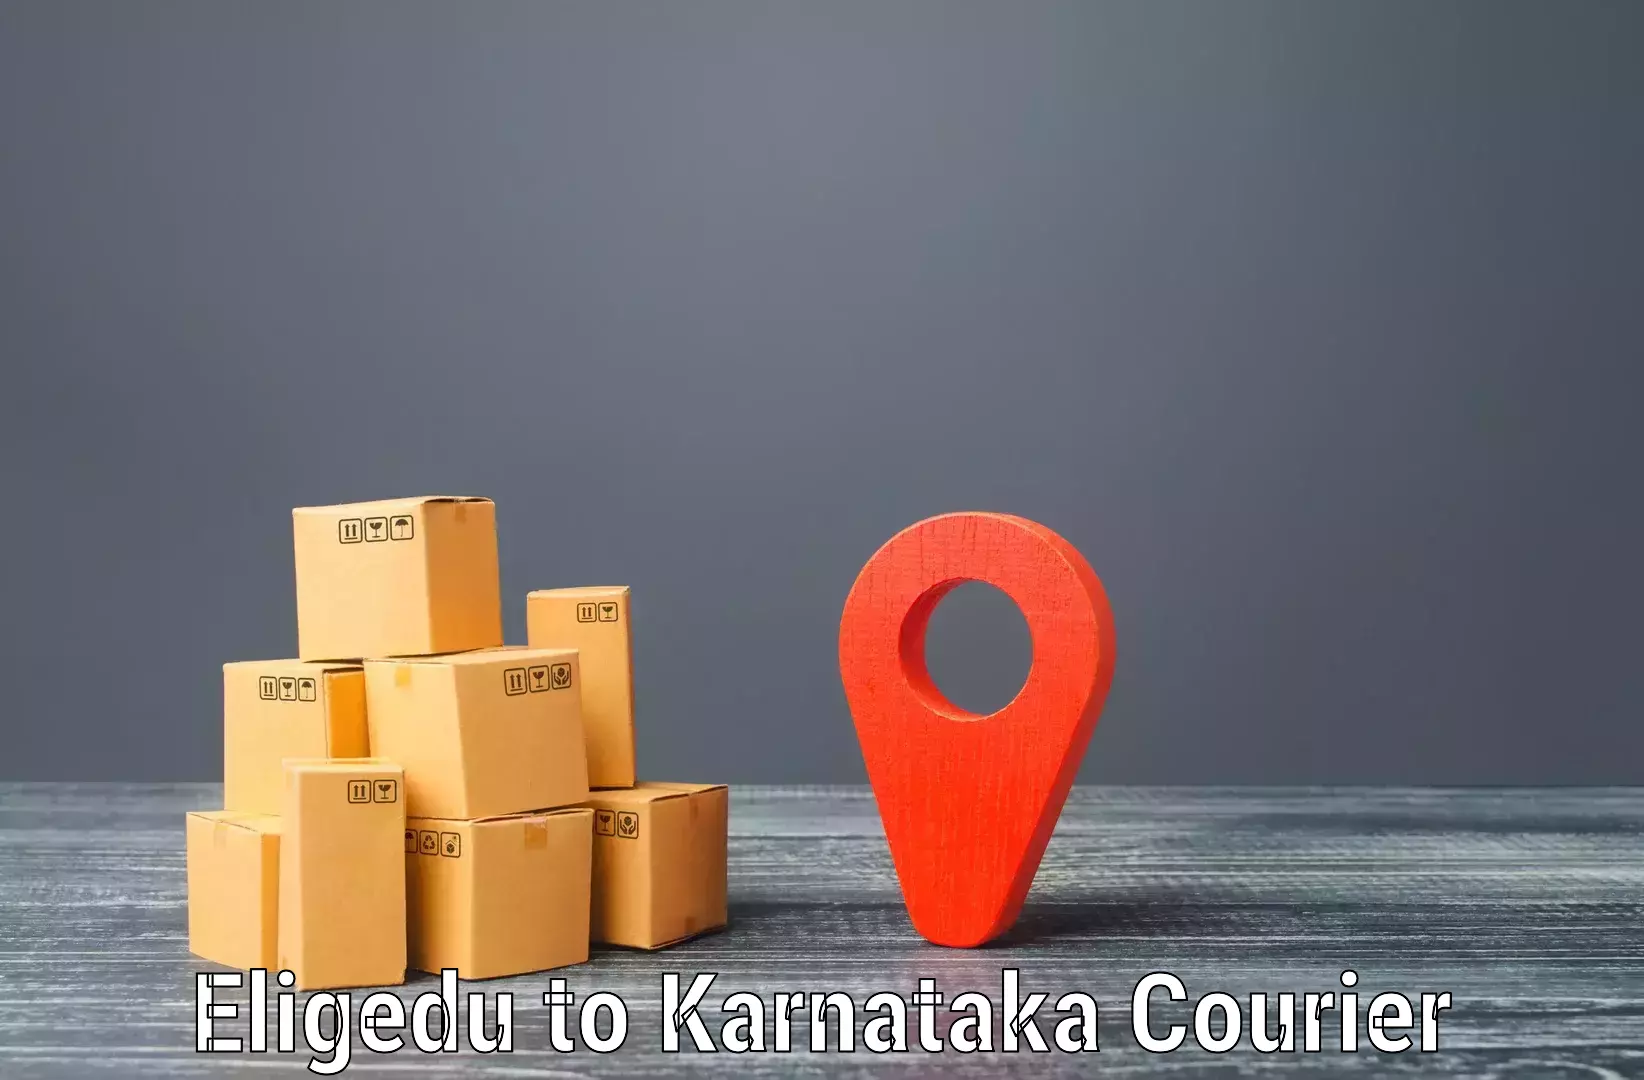 24-hour courier service Eligedu to Bellary